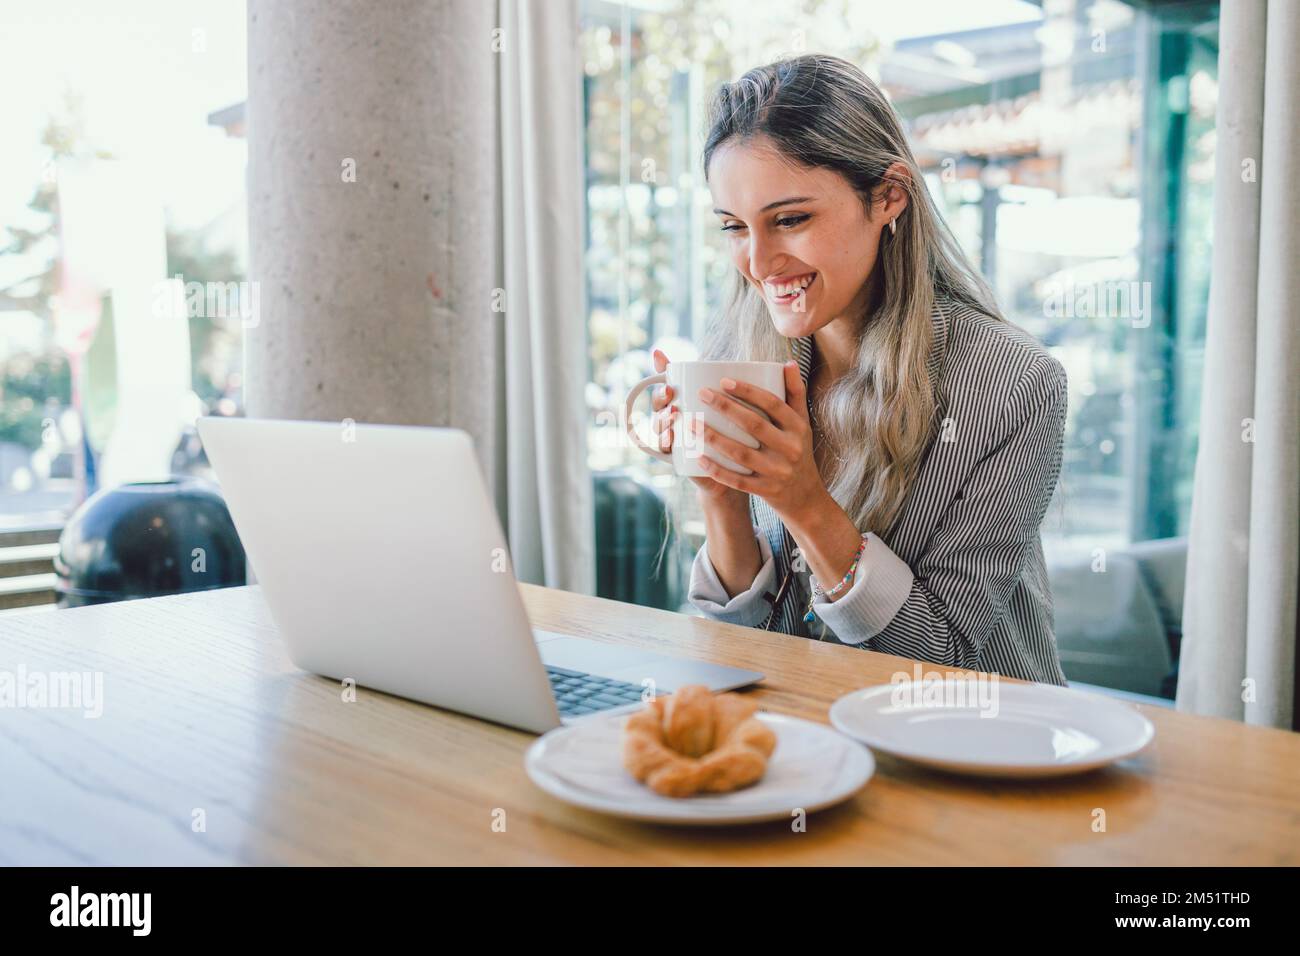 Young happy business woman using laptop, drinking tea or coffee from a mug in modern open workplace Stock Photo